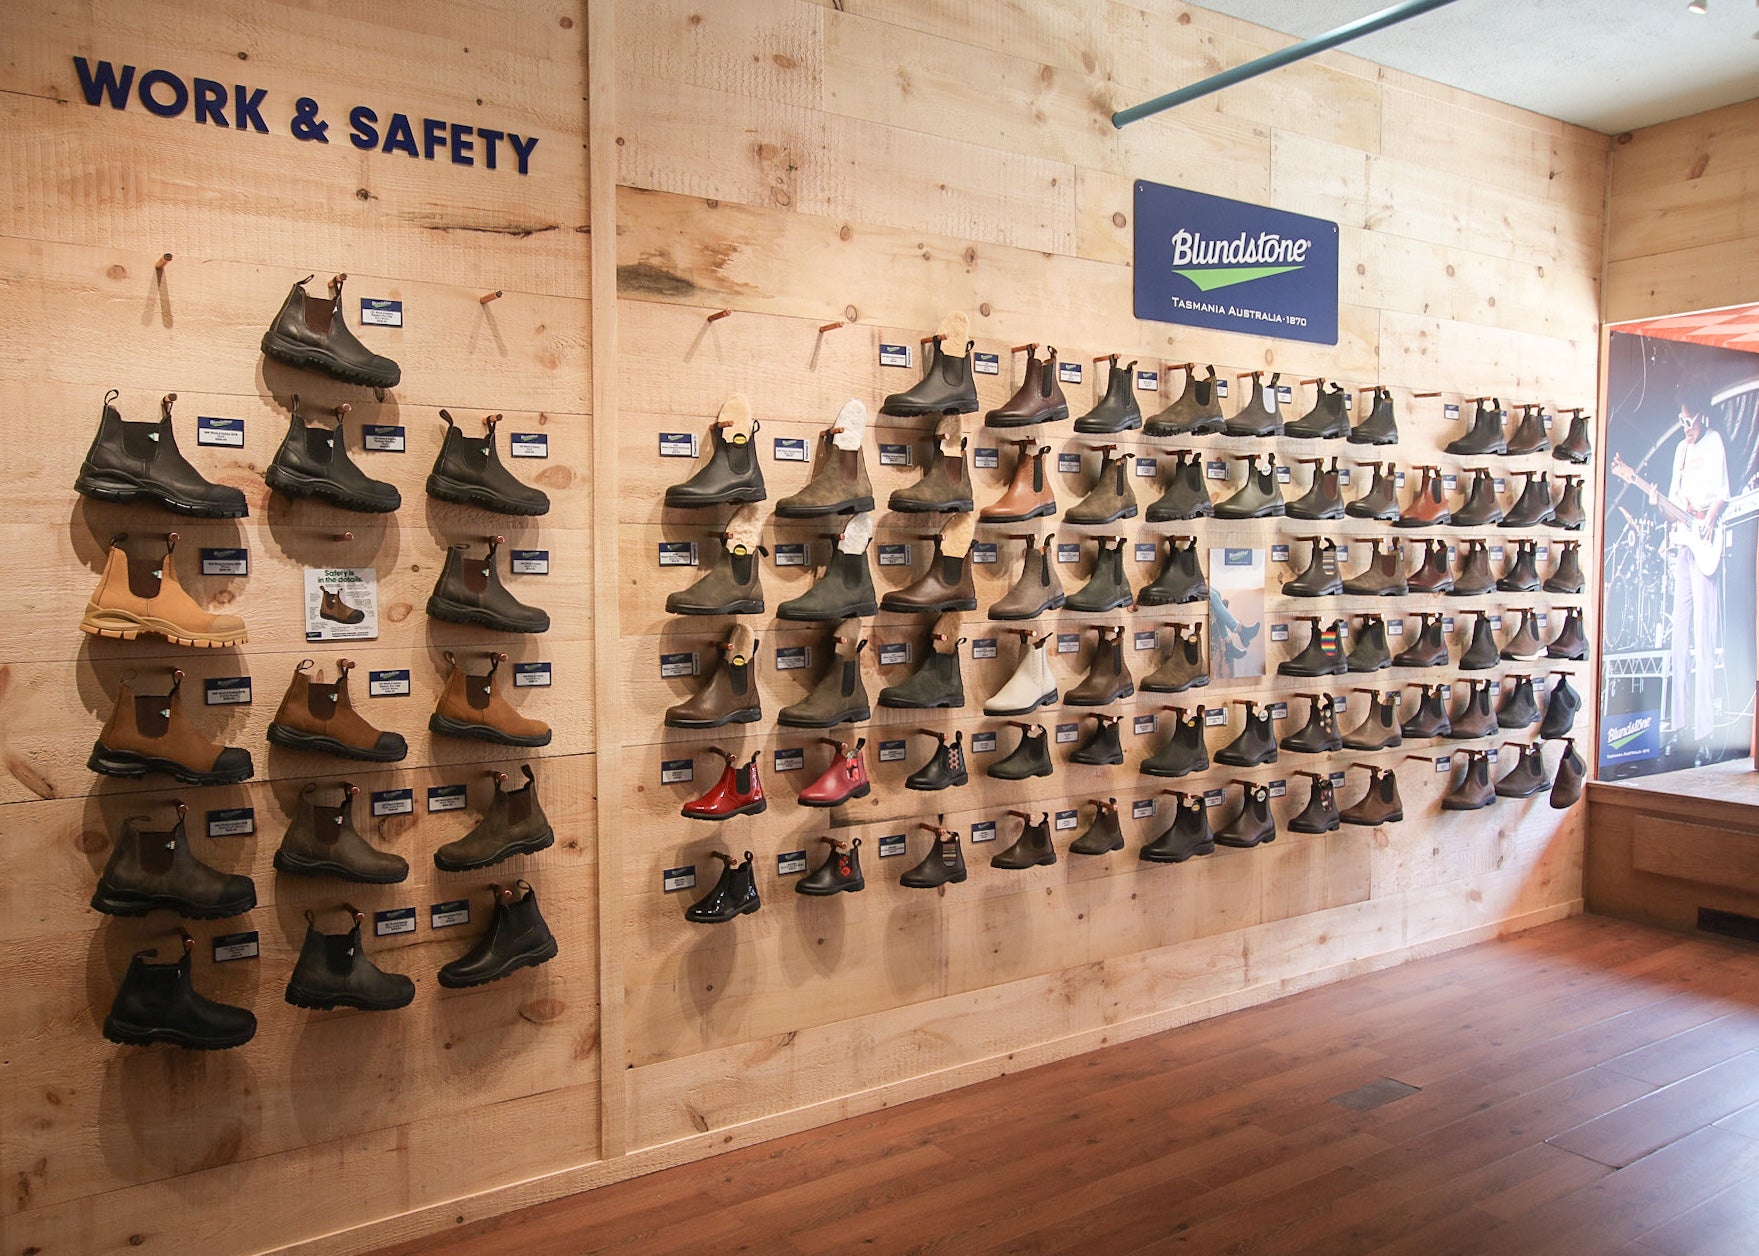 Inside Australian Boot Company store, view of blundstone boot wall